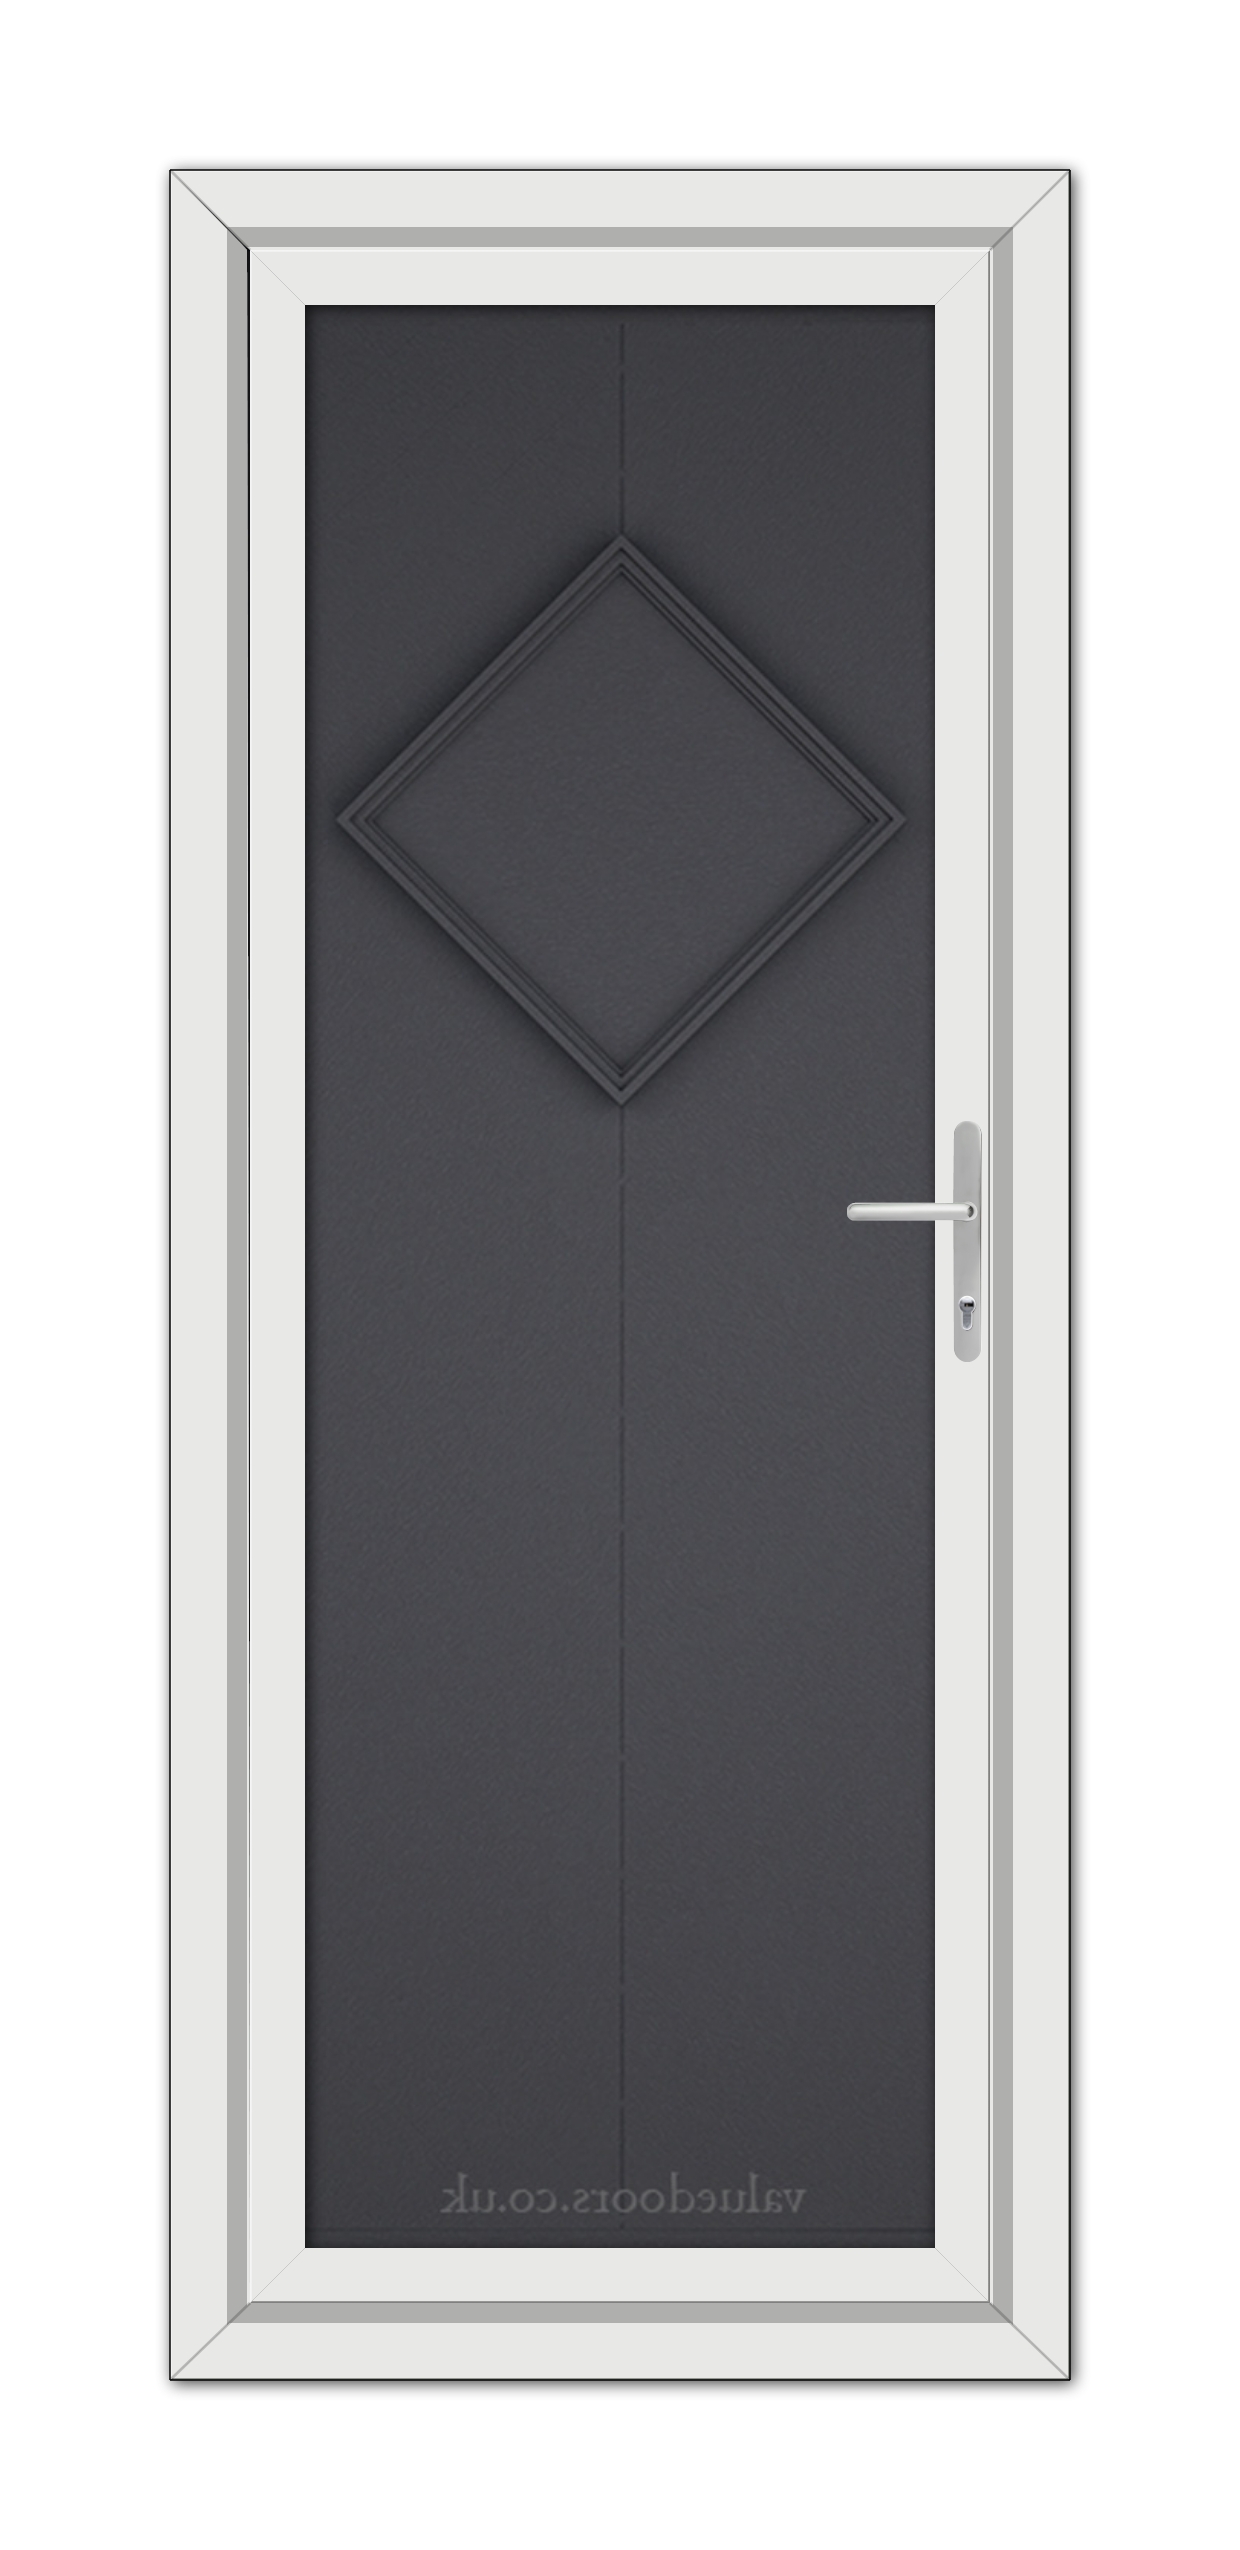 Grey Grained Hamburg Solid uPVC Door with a diamond pattern design and a white frame, featuring a silver handle on the right side.